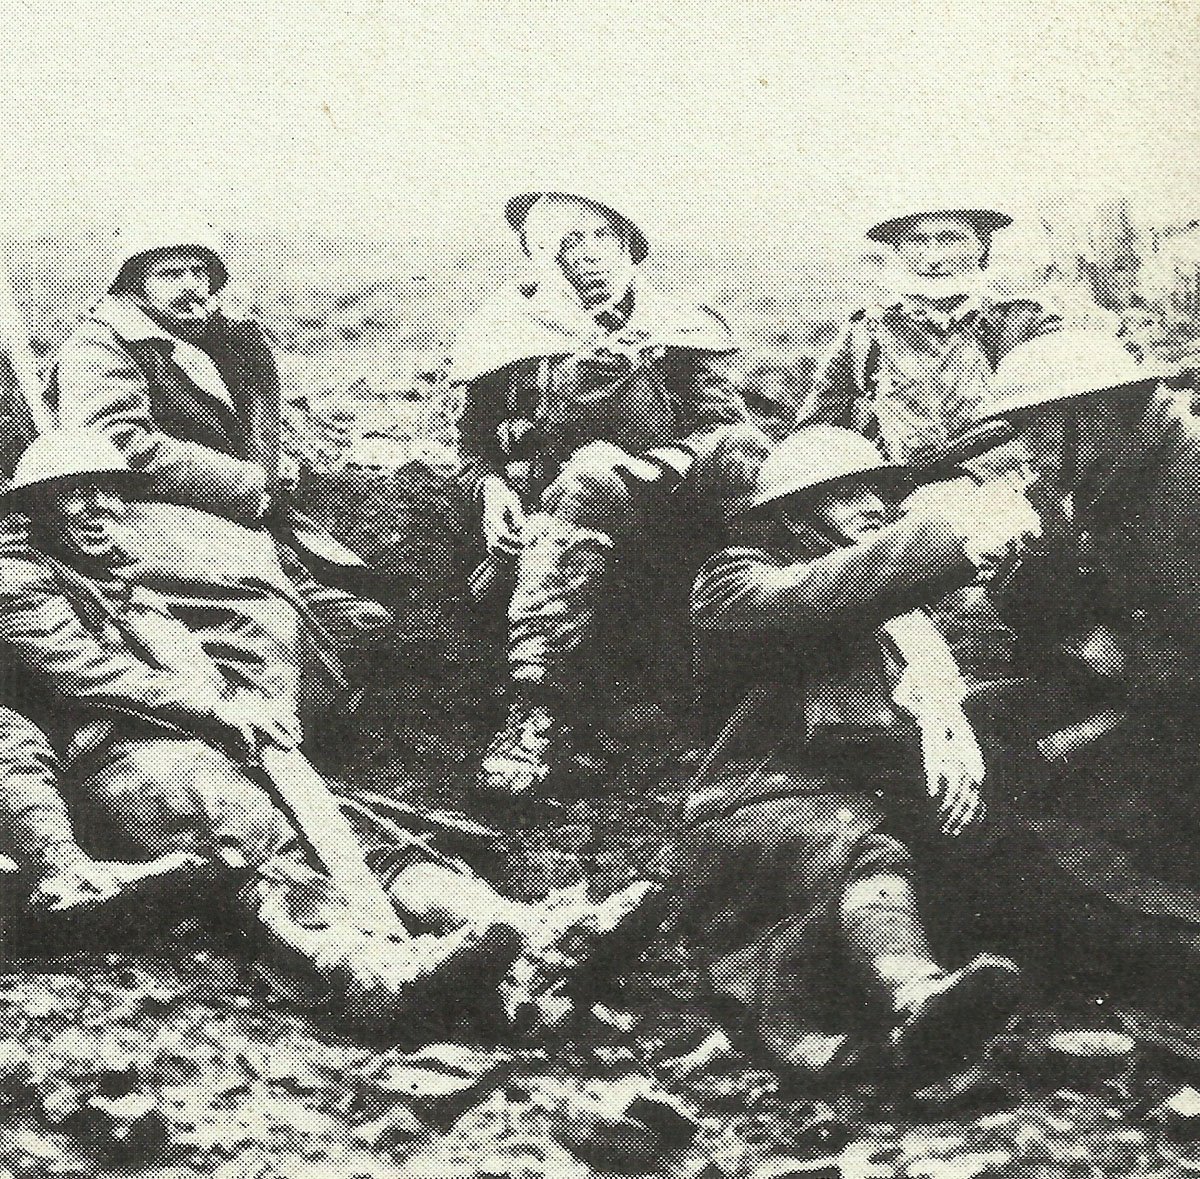 Canadian and German 'walking wounded'